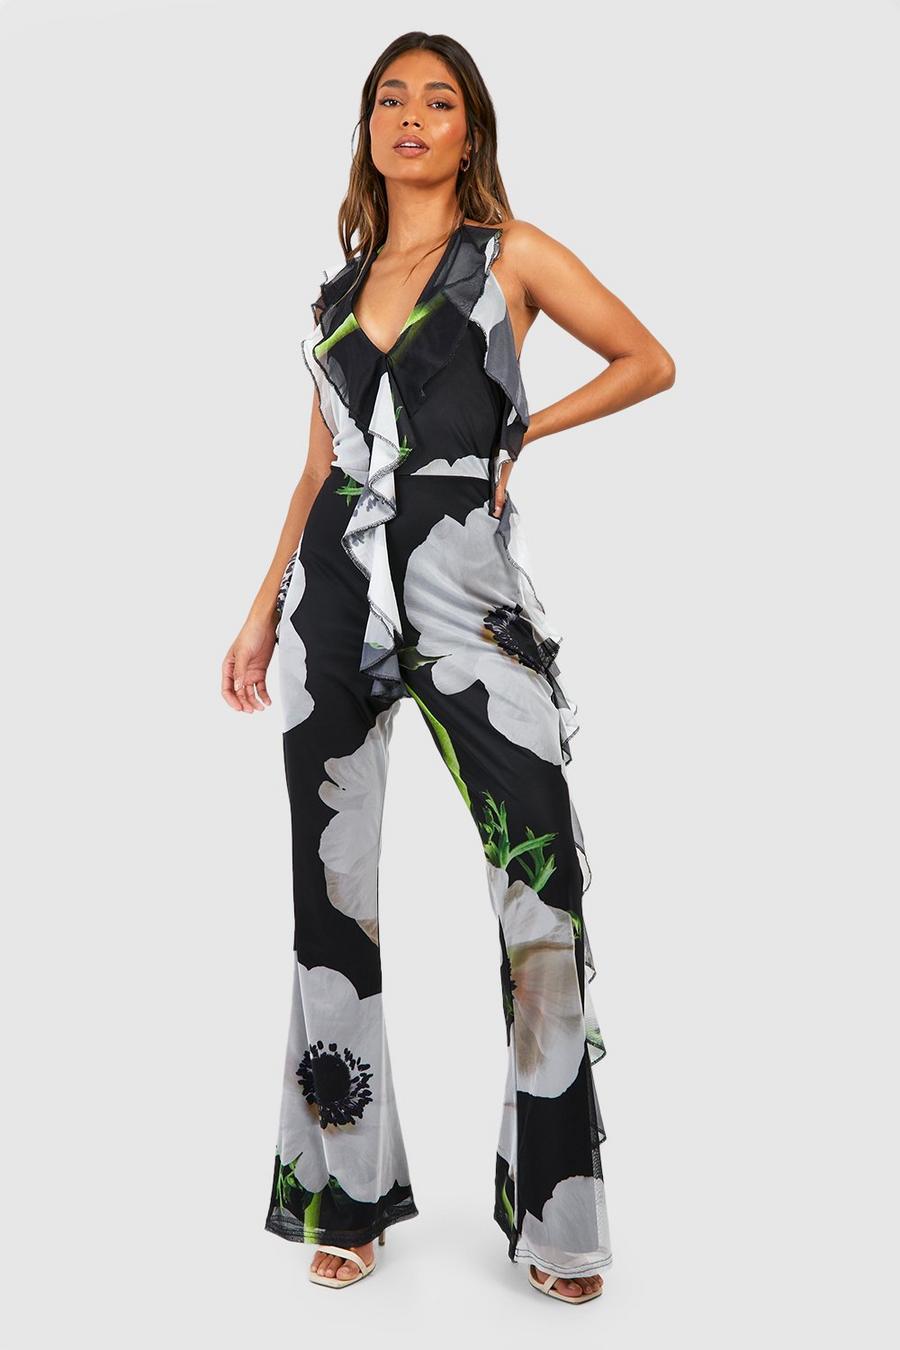 YCZDG Women Short Jumpsuits Rompers Summer Casual Small Floral